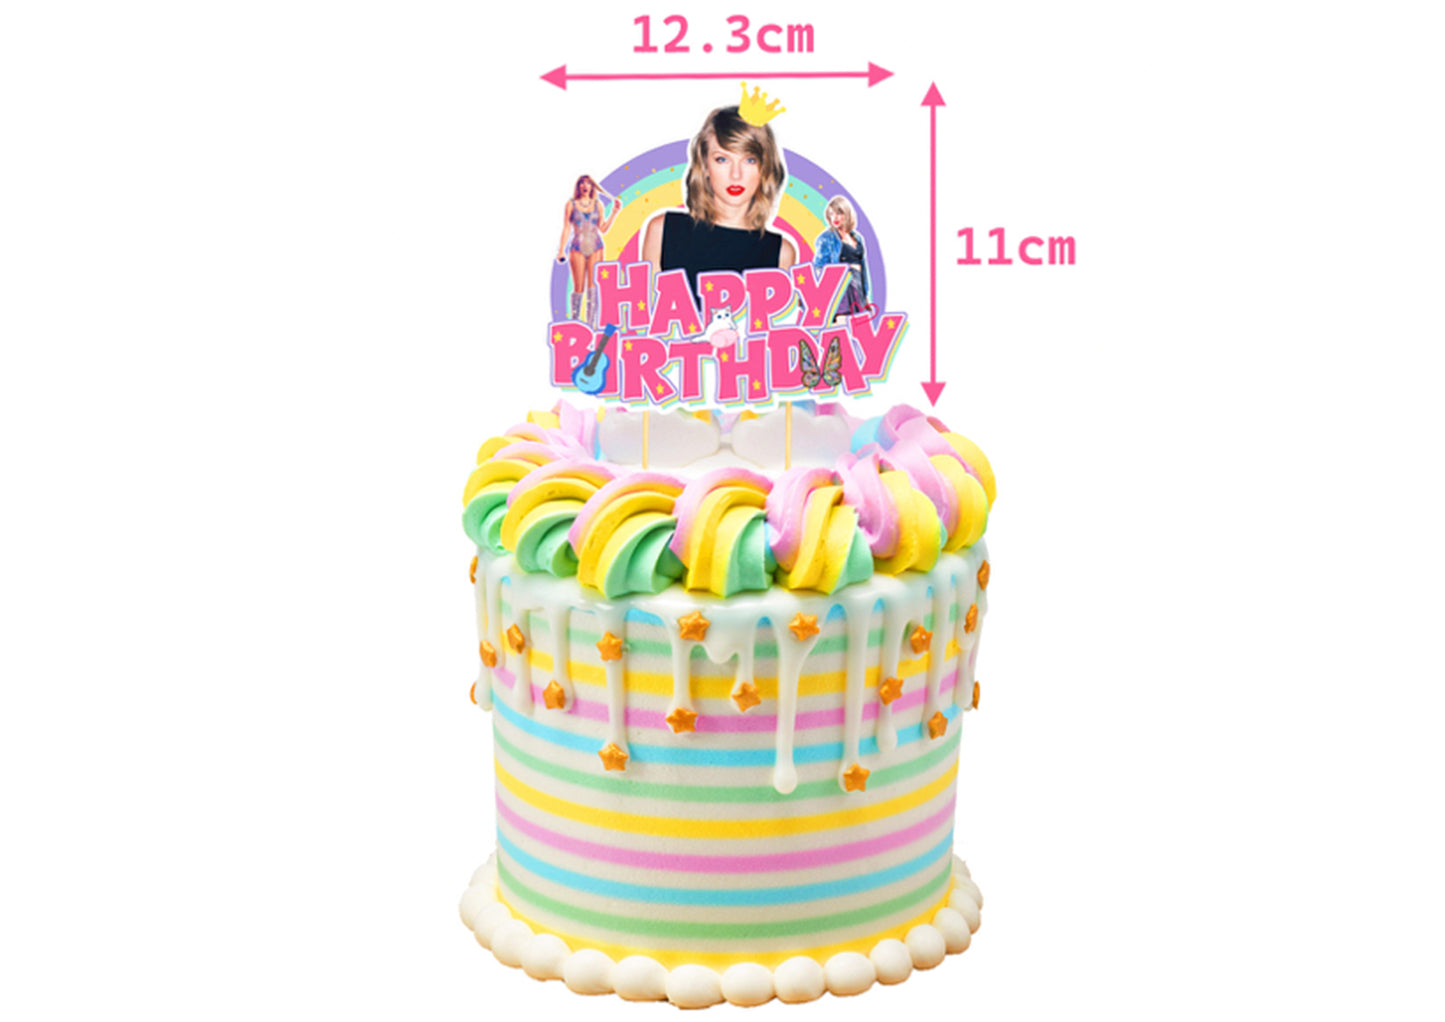 Taylor Swift Birthday Cake Topper Size